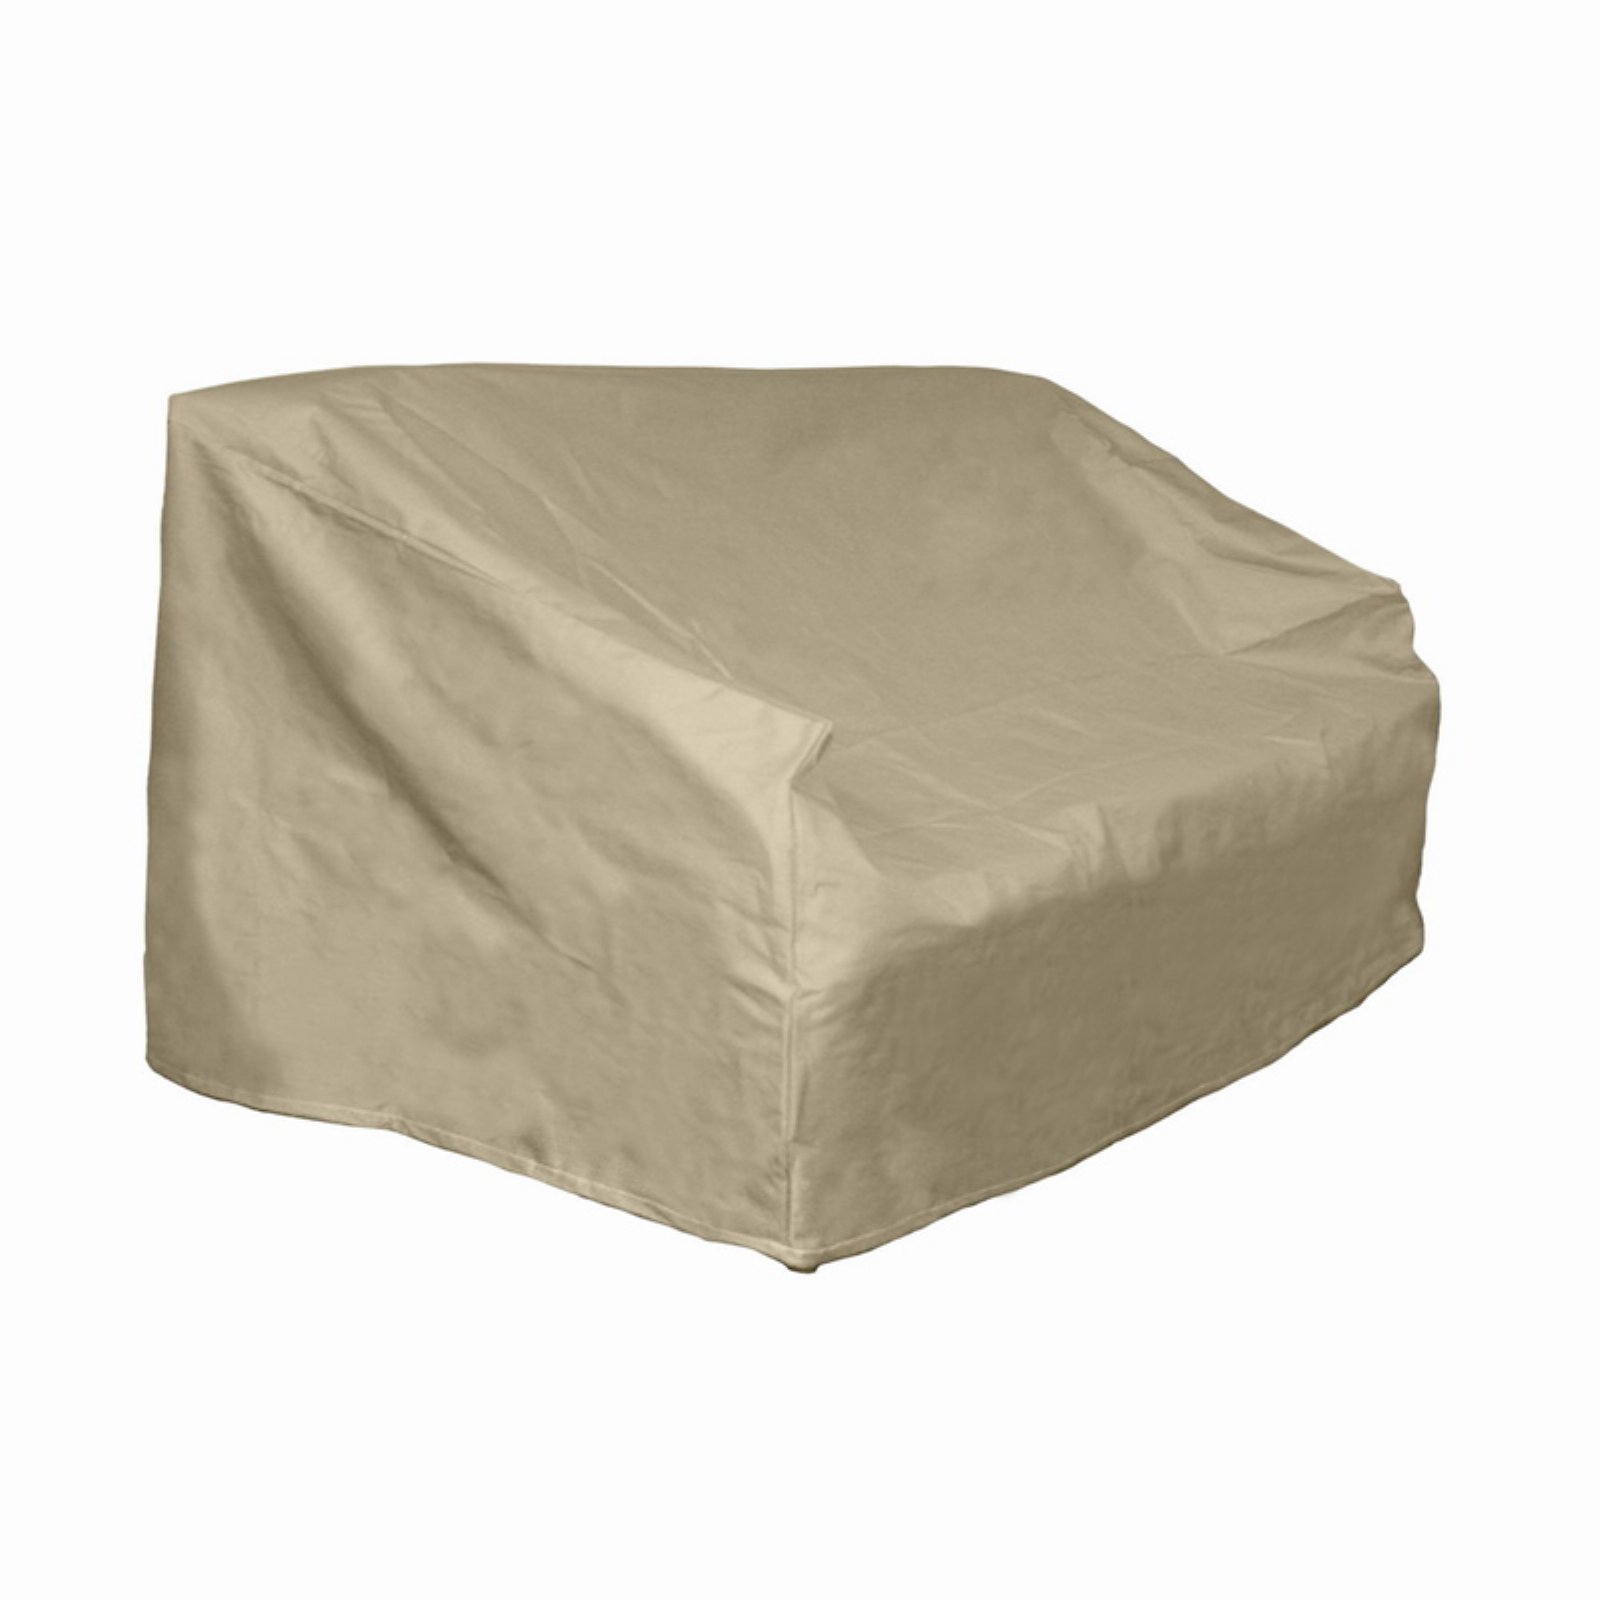 Hearth & Garden Loveseat & Bench Cover - image 1 of 2